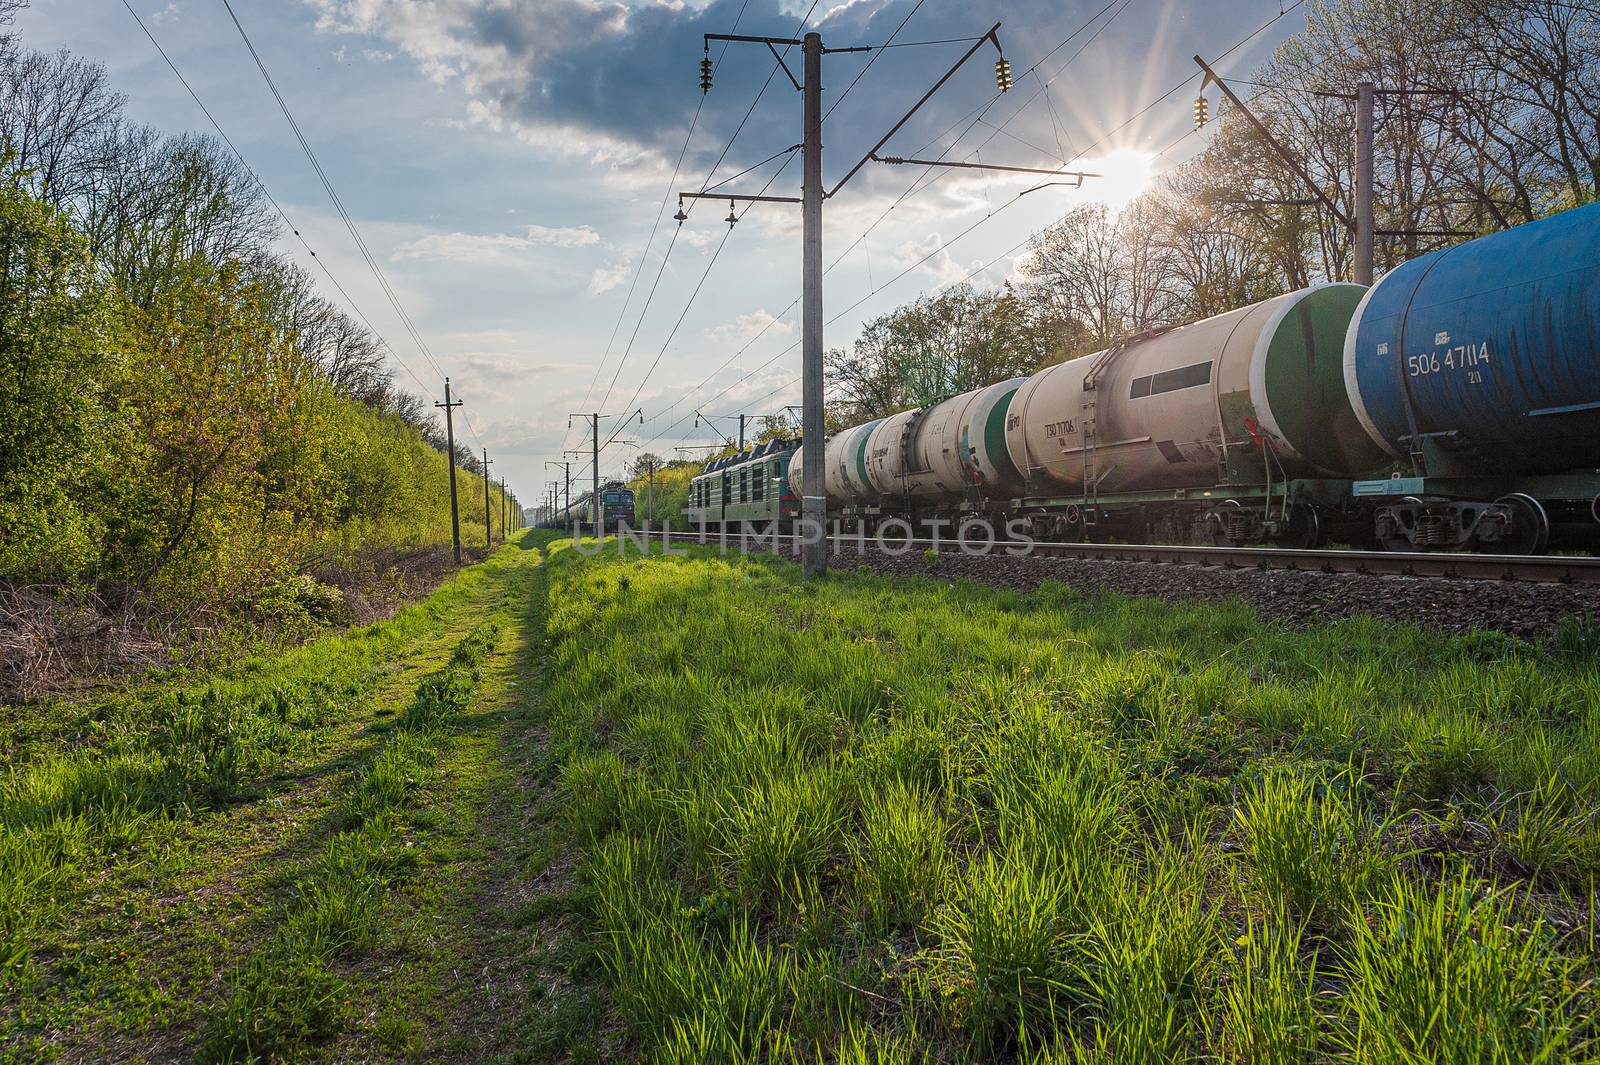 two trains with tank wagons move on railway tracks towards each other at sunset near green grass and trees